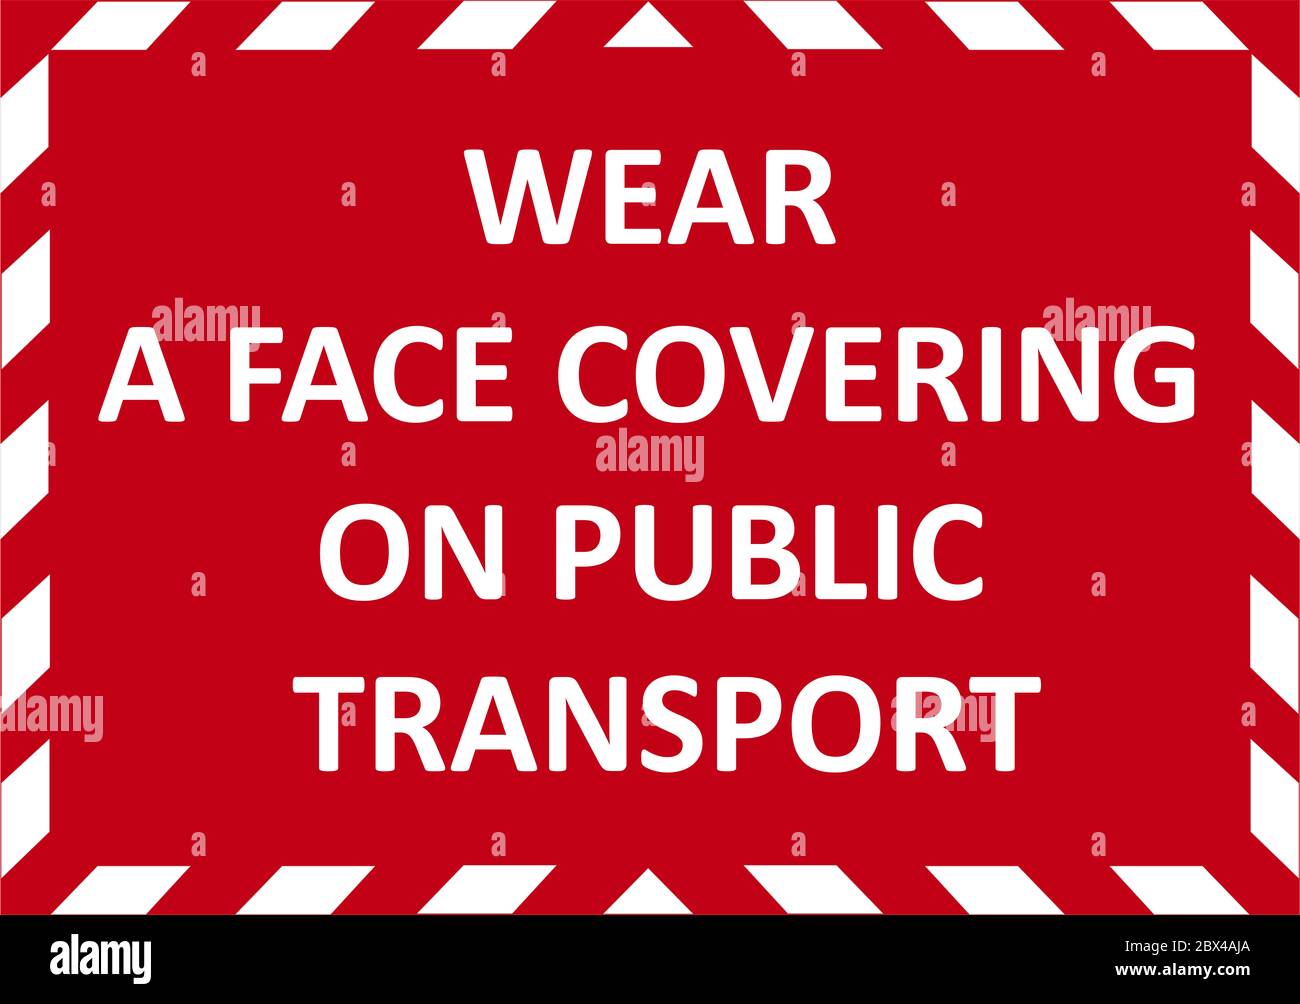 WEAR A FACE COVERING ON PUBLIC TRANSPORT warning sign. Red quarantine sign that help to battle against Covid-19 in the United Kingdom. RASTER. Stock Photo